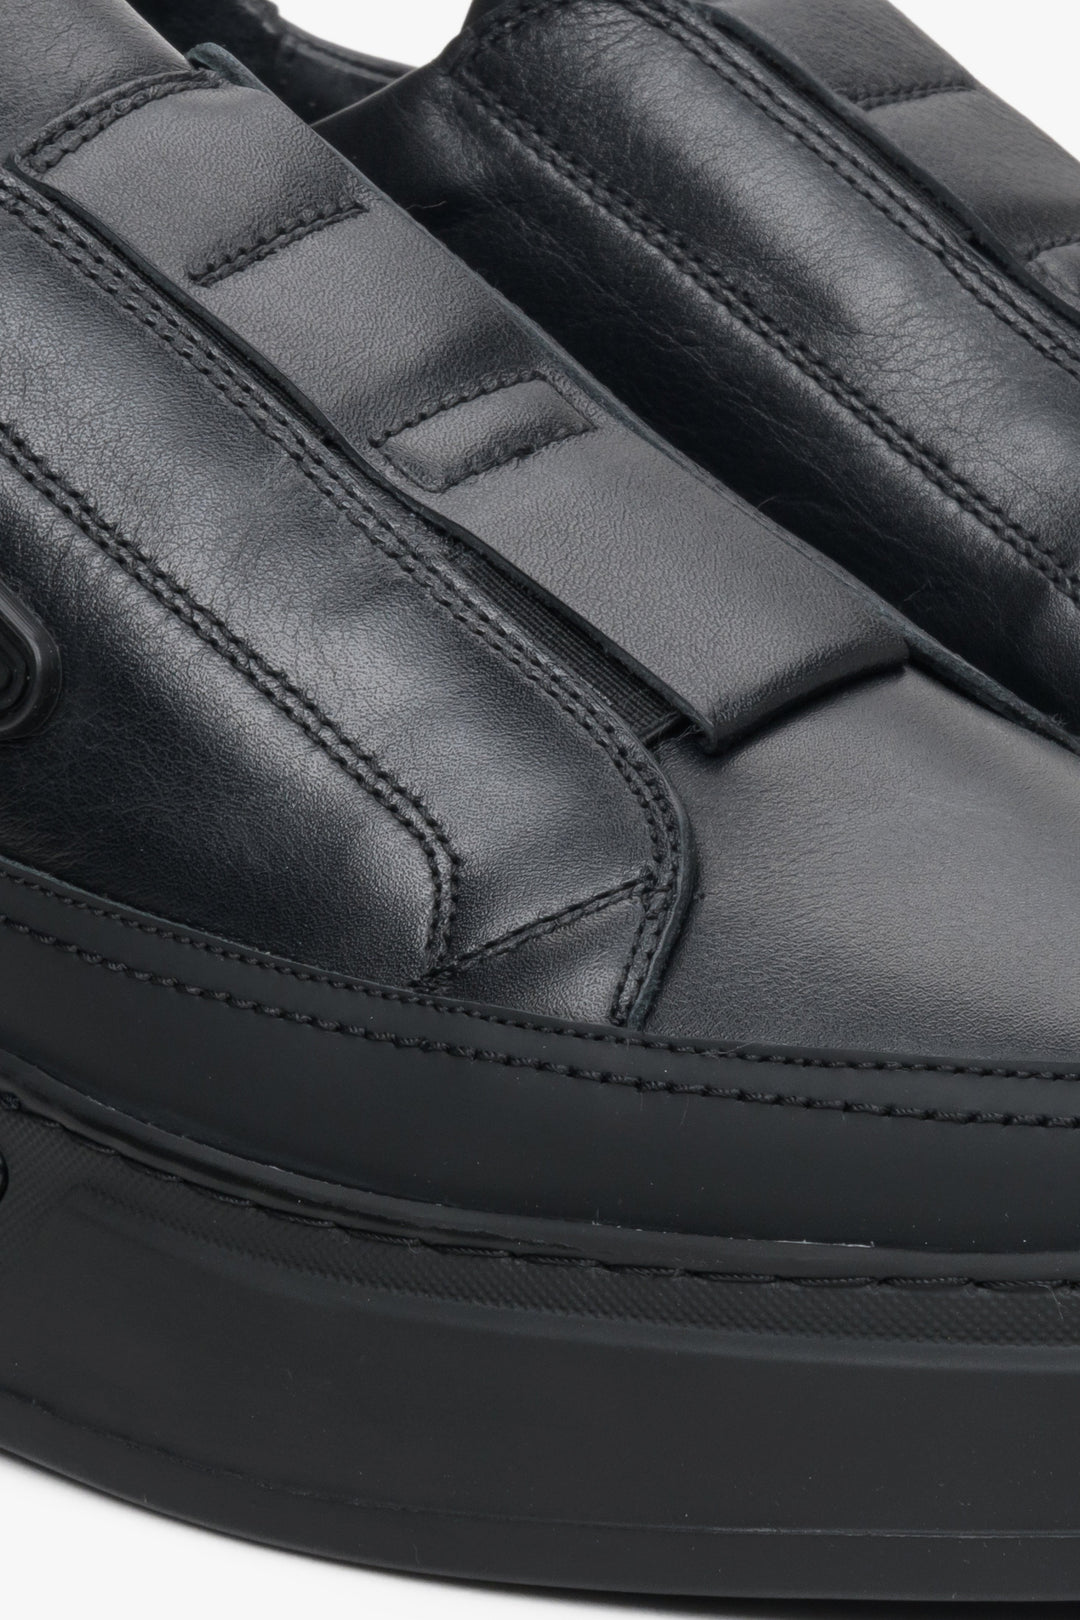 Men's black leather slip-on sneakers by Estro - close-up on the details.